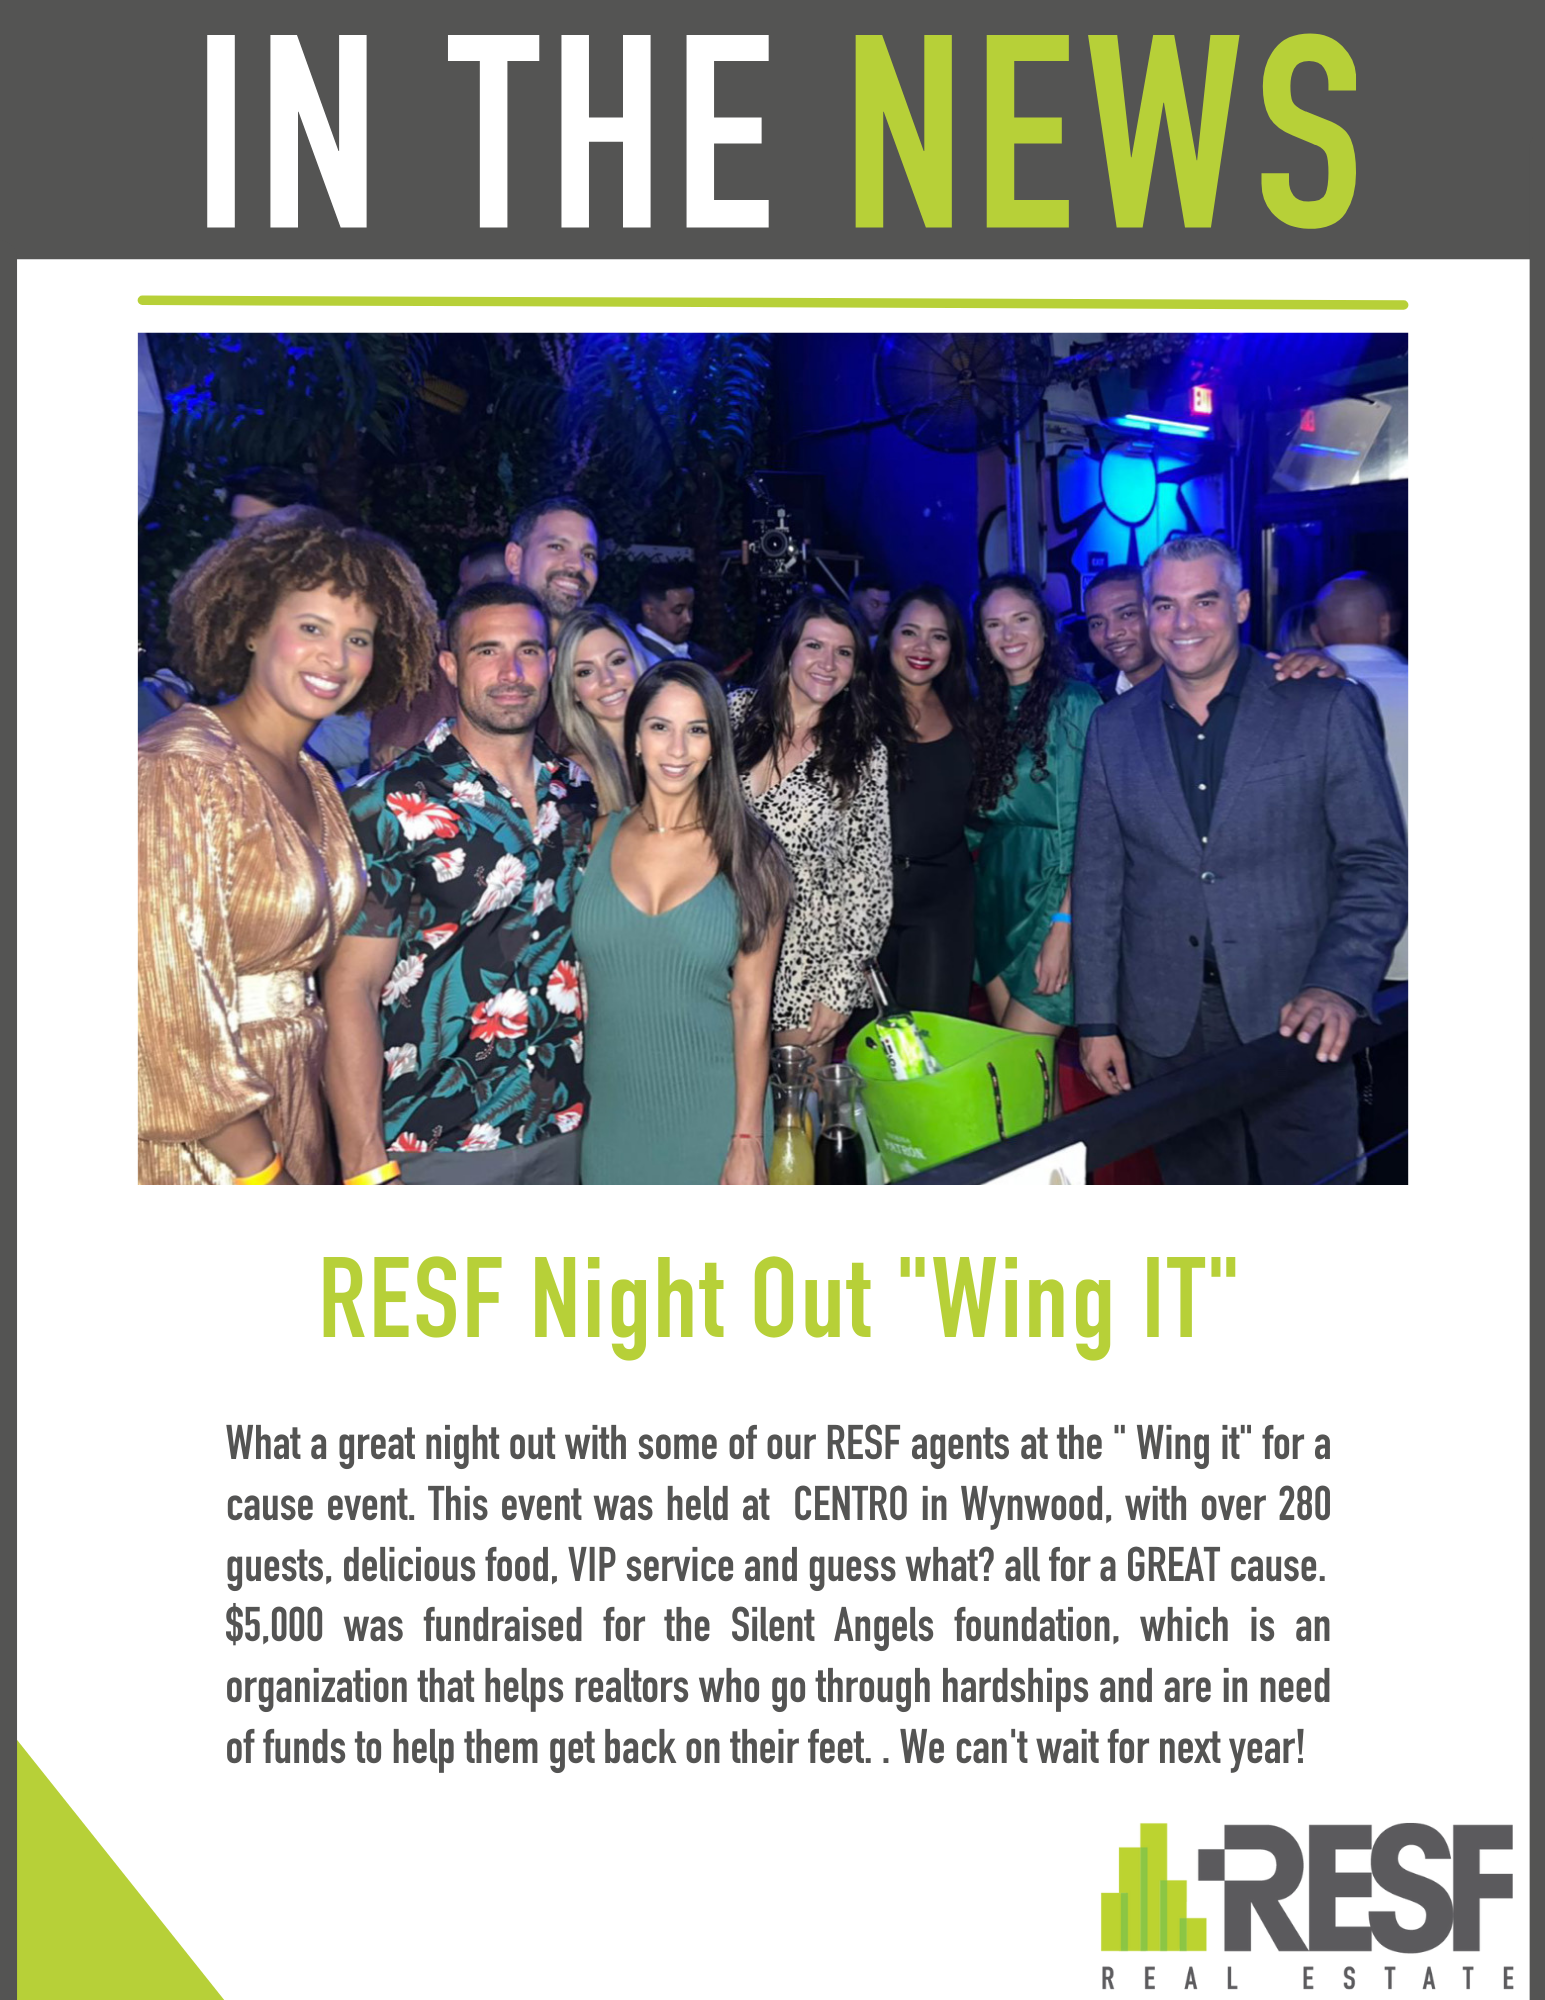 RESF Night Out “Wing IT”